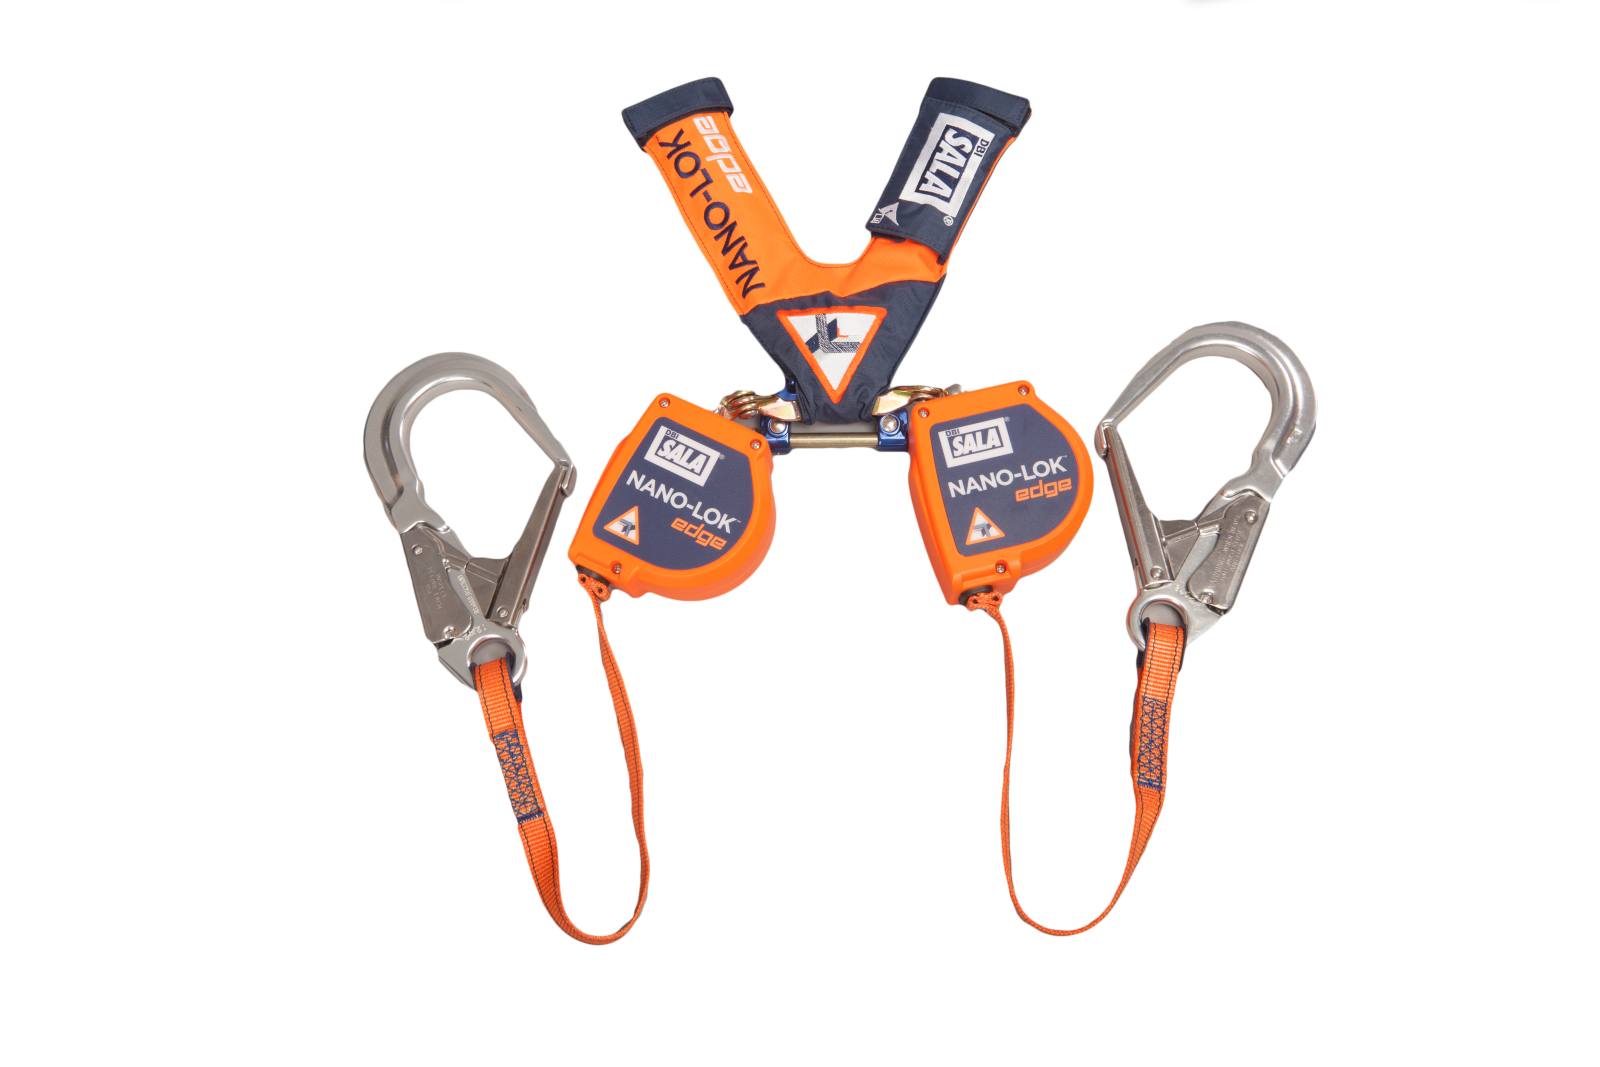 3M DBI-SALA Nano-Lok Edge twin retractable type fall arrester, edge-tested, length: 2.5 m, Dyneema webbing 20 mm, Trilock webbing carabiner, 2 aluminium scaffold carabiners opening width 57 mm, 3M Connected Safety-ready RFID tag for inspection, 2.5 m